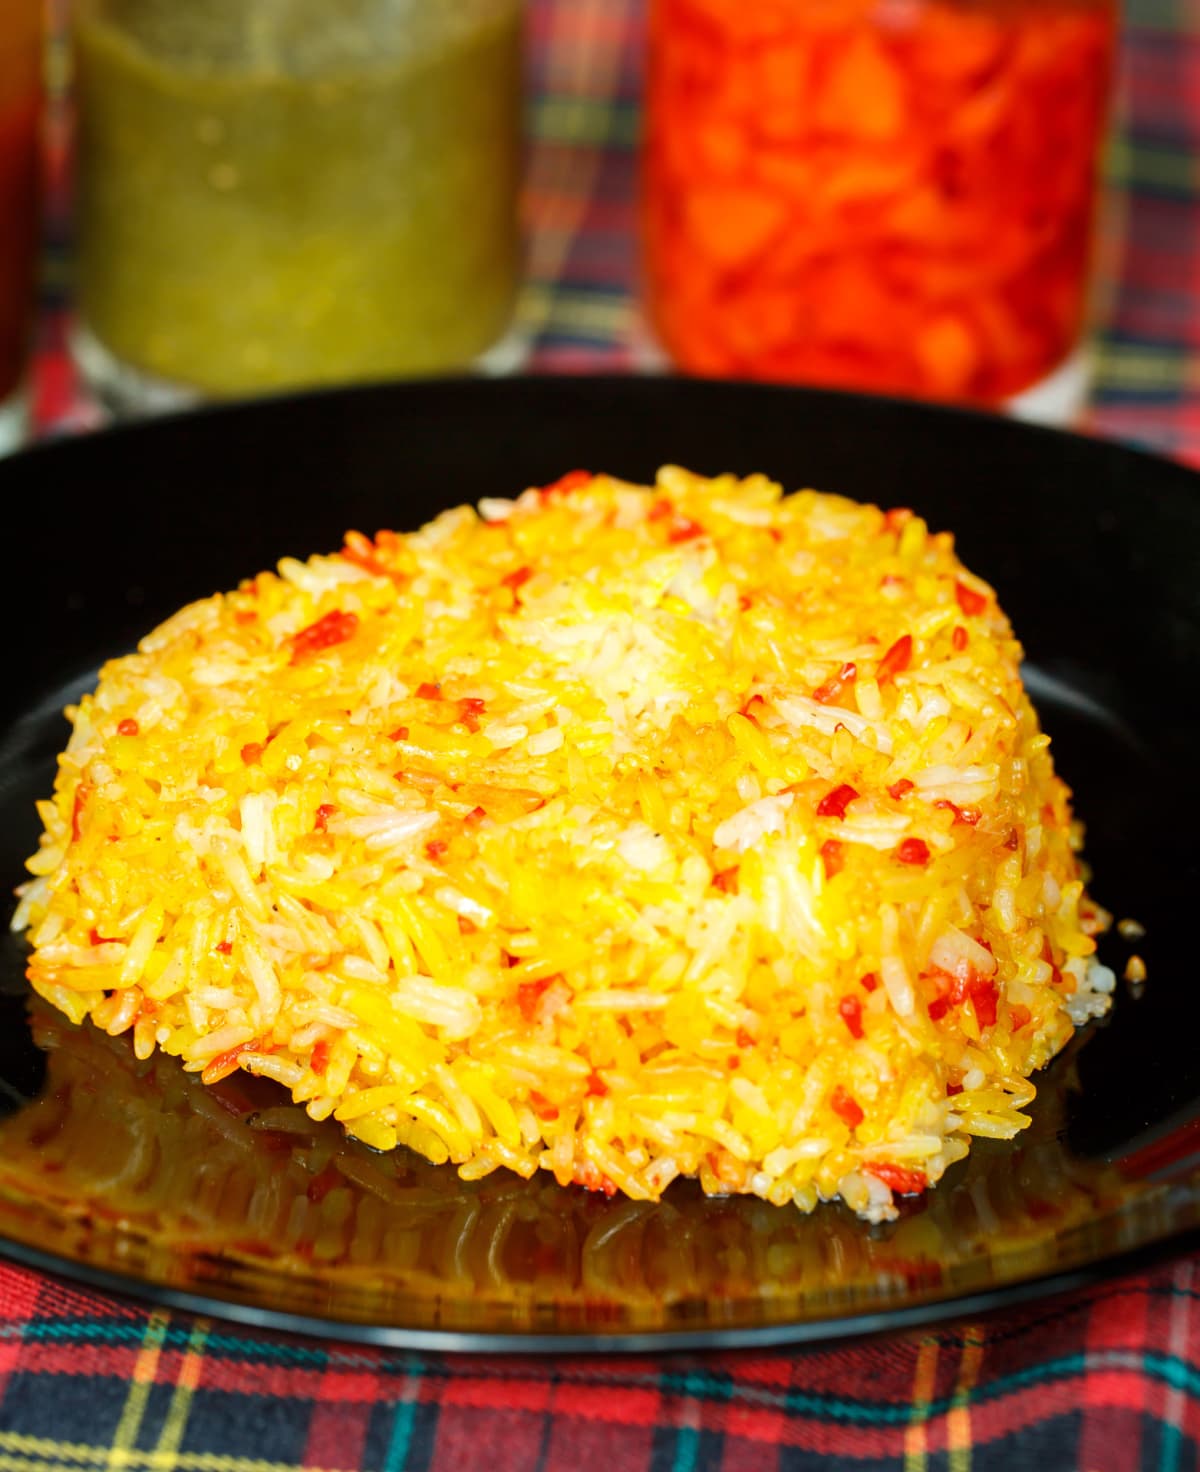 Yellow rice with saffron on a plate